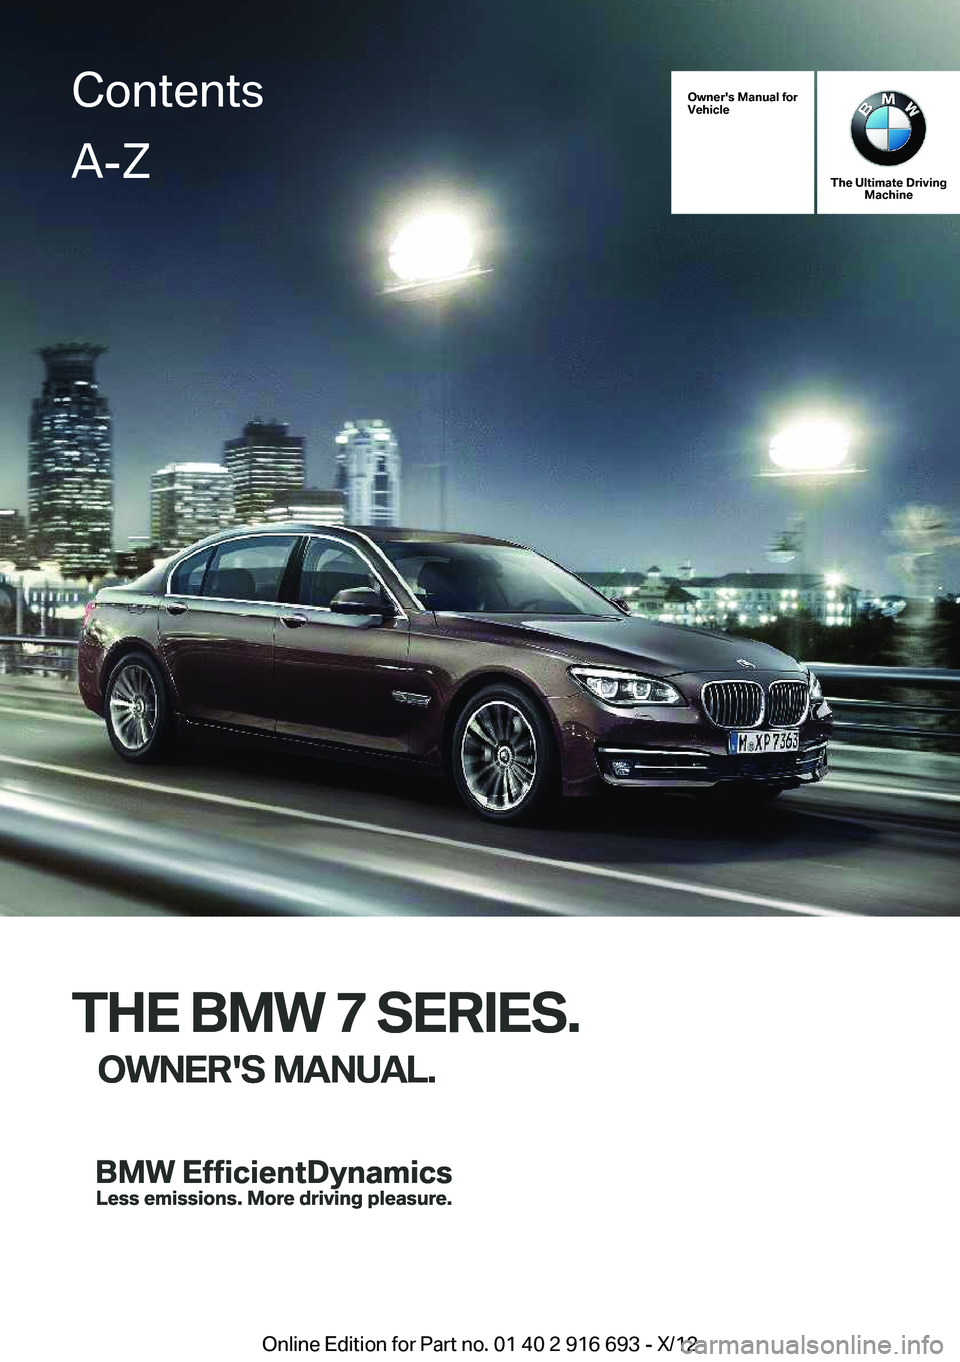 BMW 740I 2013  Owners Manual Owner's Manual for
Vehicle
THE BMW 7 SERIES.
OWNER'S MANUAL.
The Ultimate Driving Machine
THE BMW 7 SERIES.
OWNER'S MANUAL.
ContentsA-Z
Online Edition for Part no. 01 40 2 916 693 - X/12  